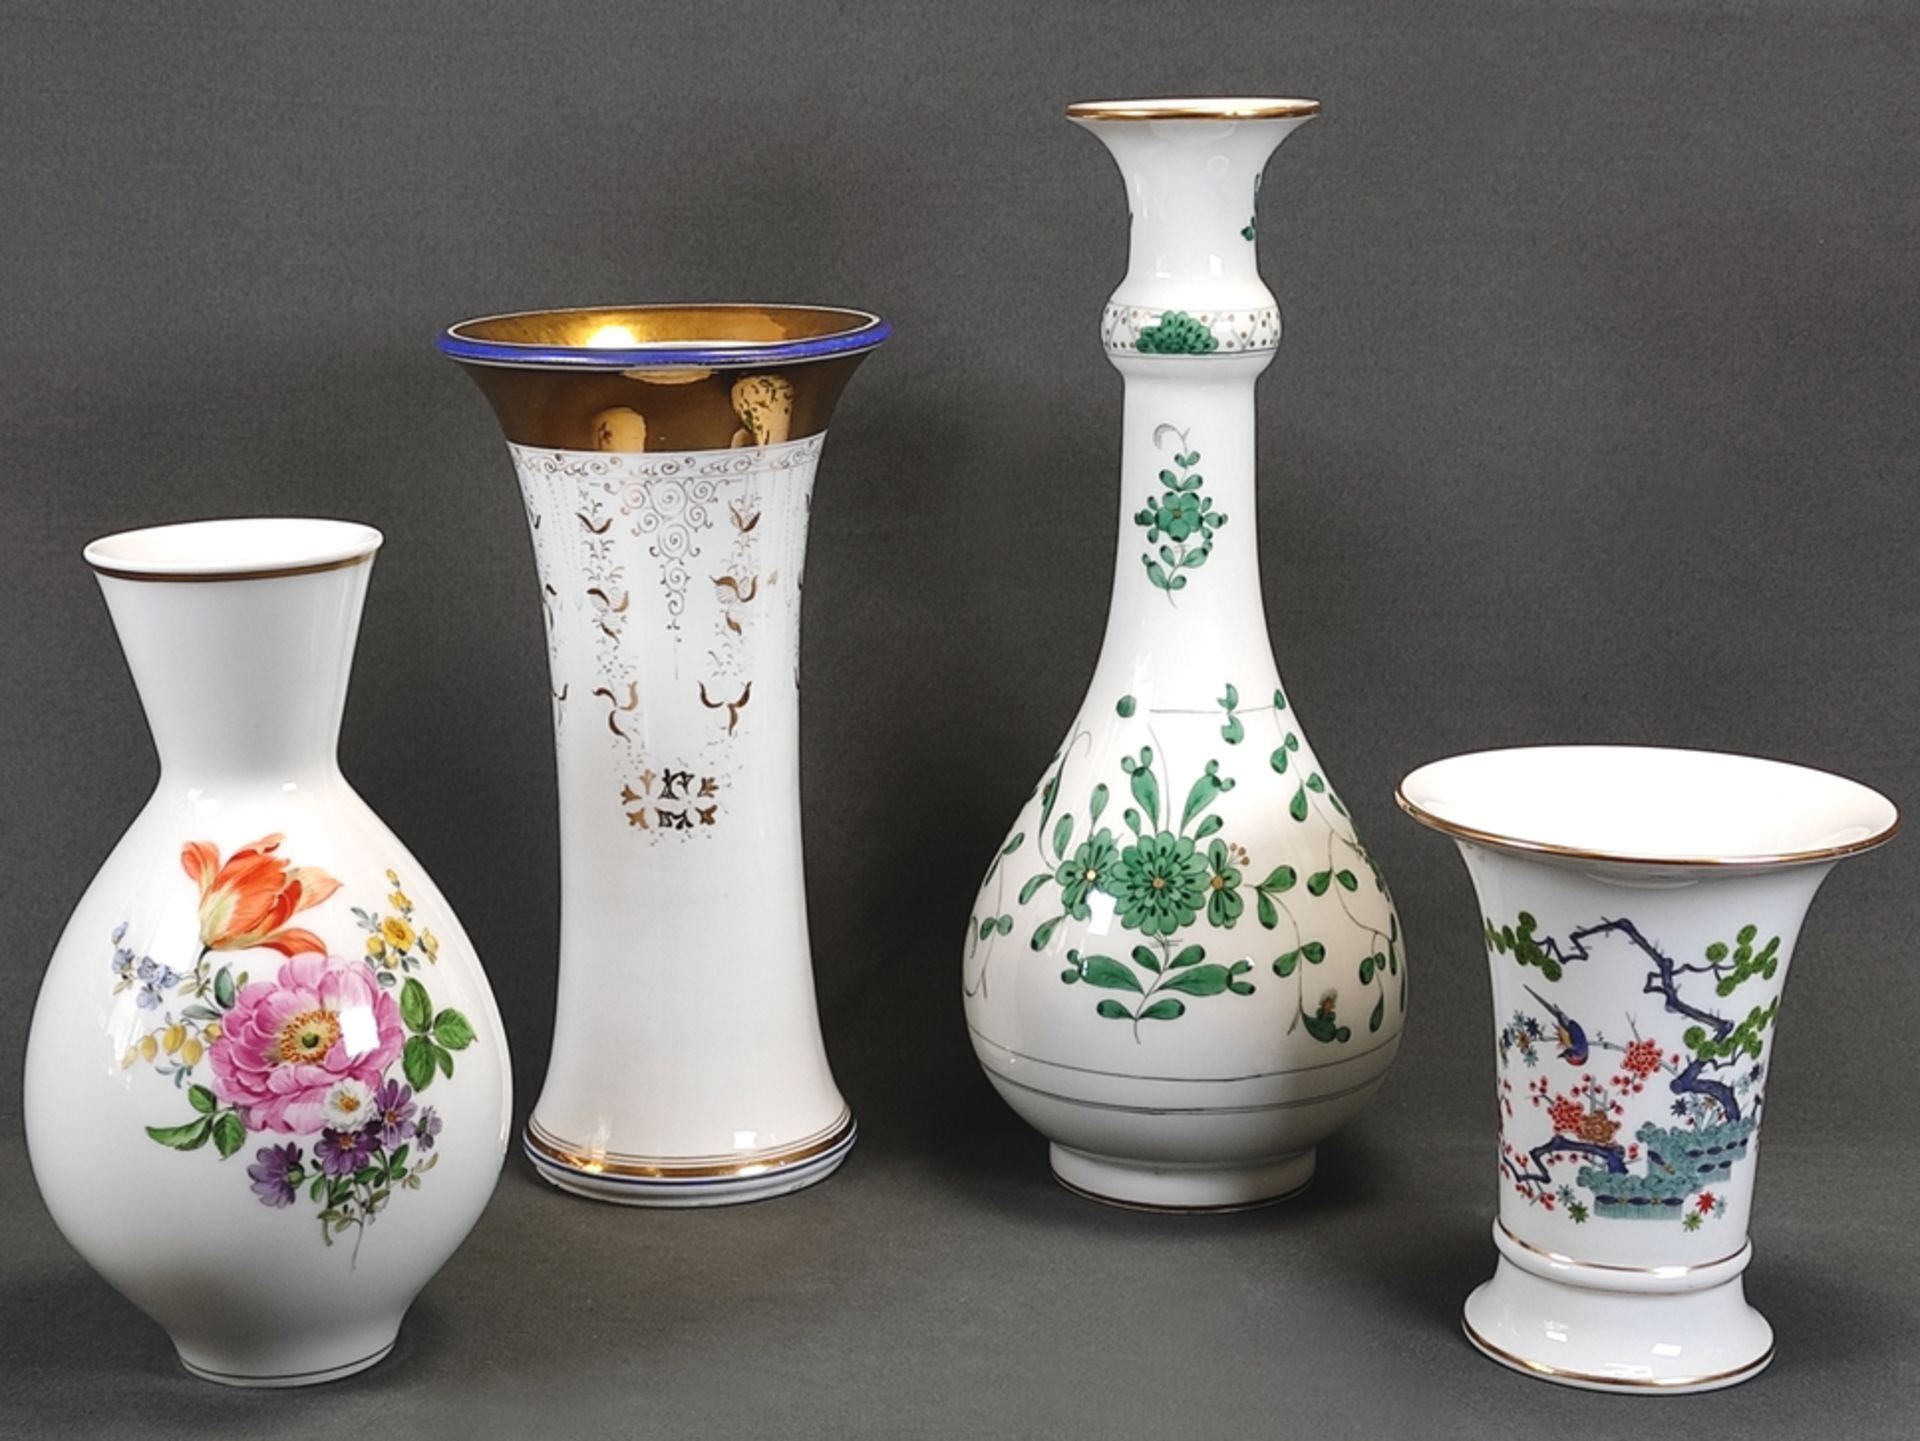 Four vases, Meissen sword mark, various decorations and shapes, bulbous vase with slender, high nec